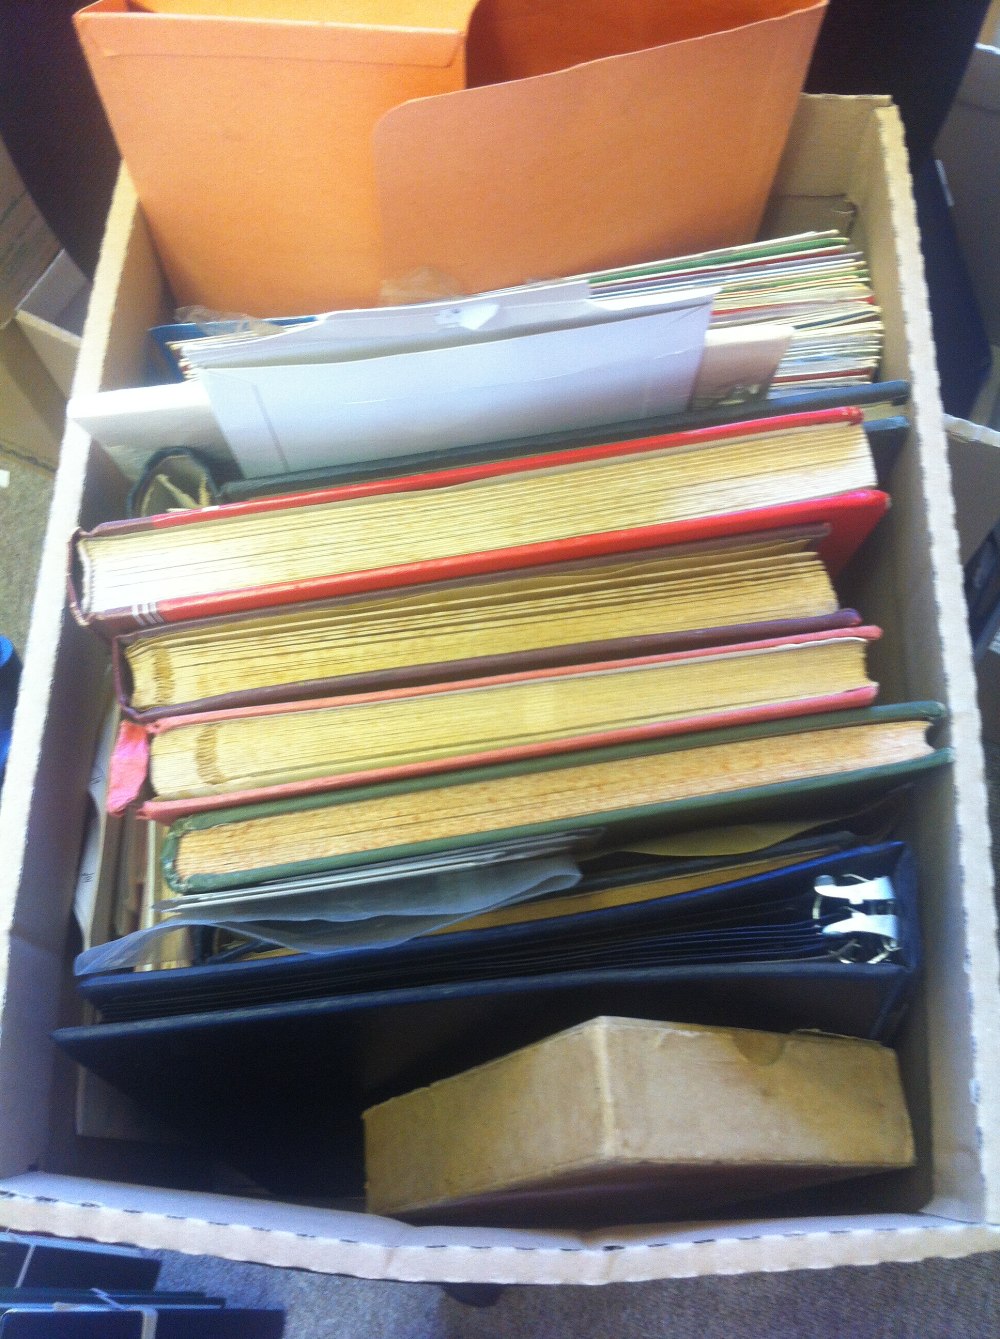 All World accumulation in box, albums, stock books, old club books, etc, a great rummage lot, sure